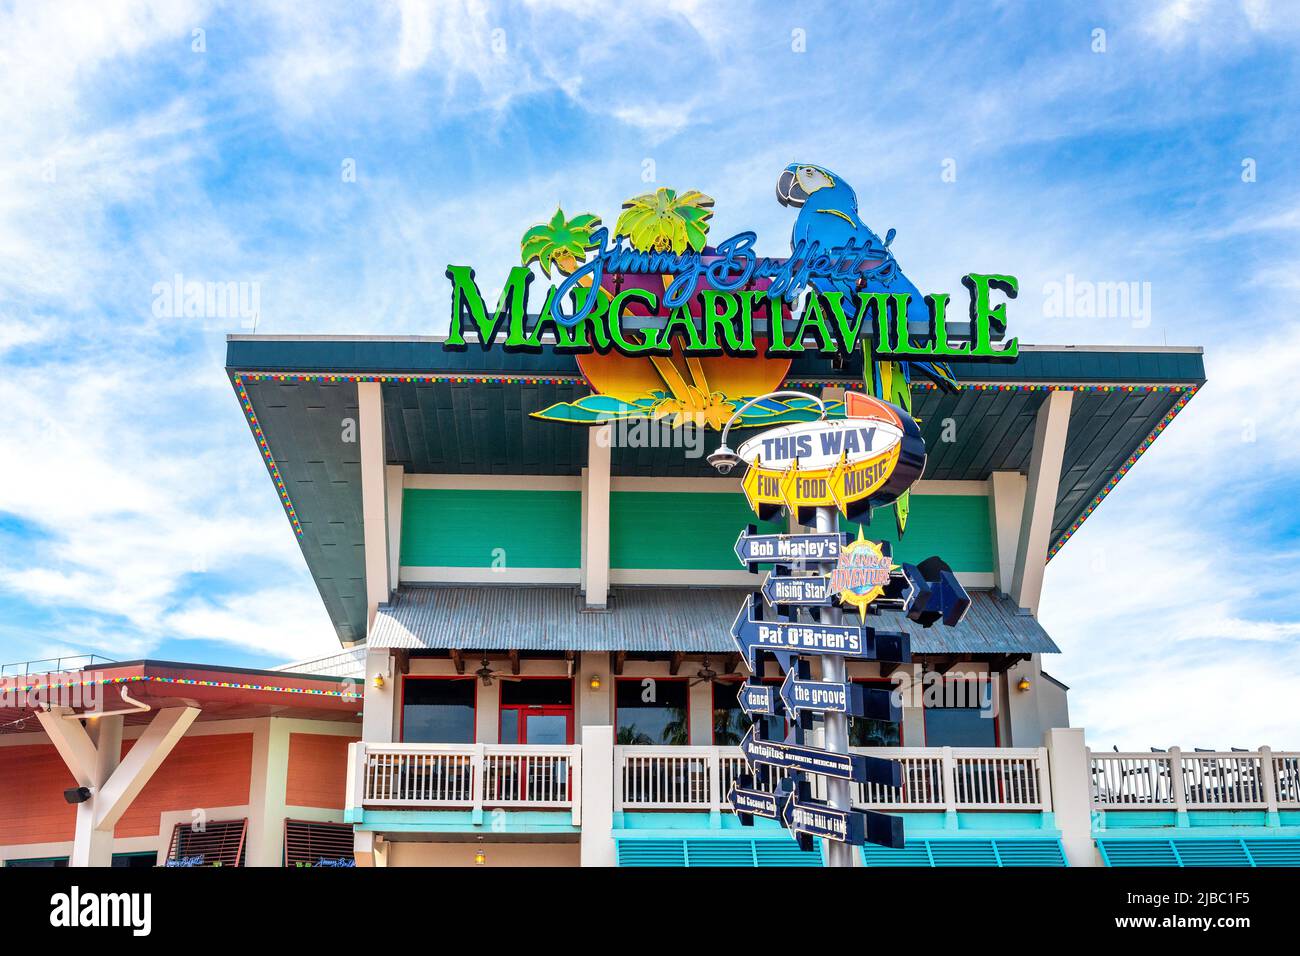 Jimmy Buffett's Margaritaville sign on top of a business building. Universal Studios Florida is a famous place and a major tourist attraction in the S Stock Photo